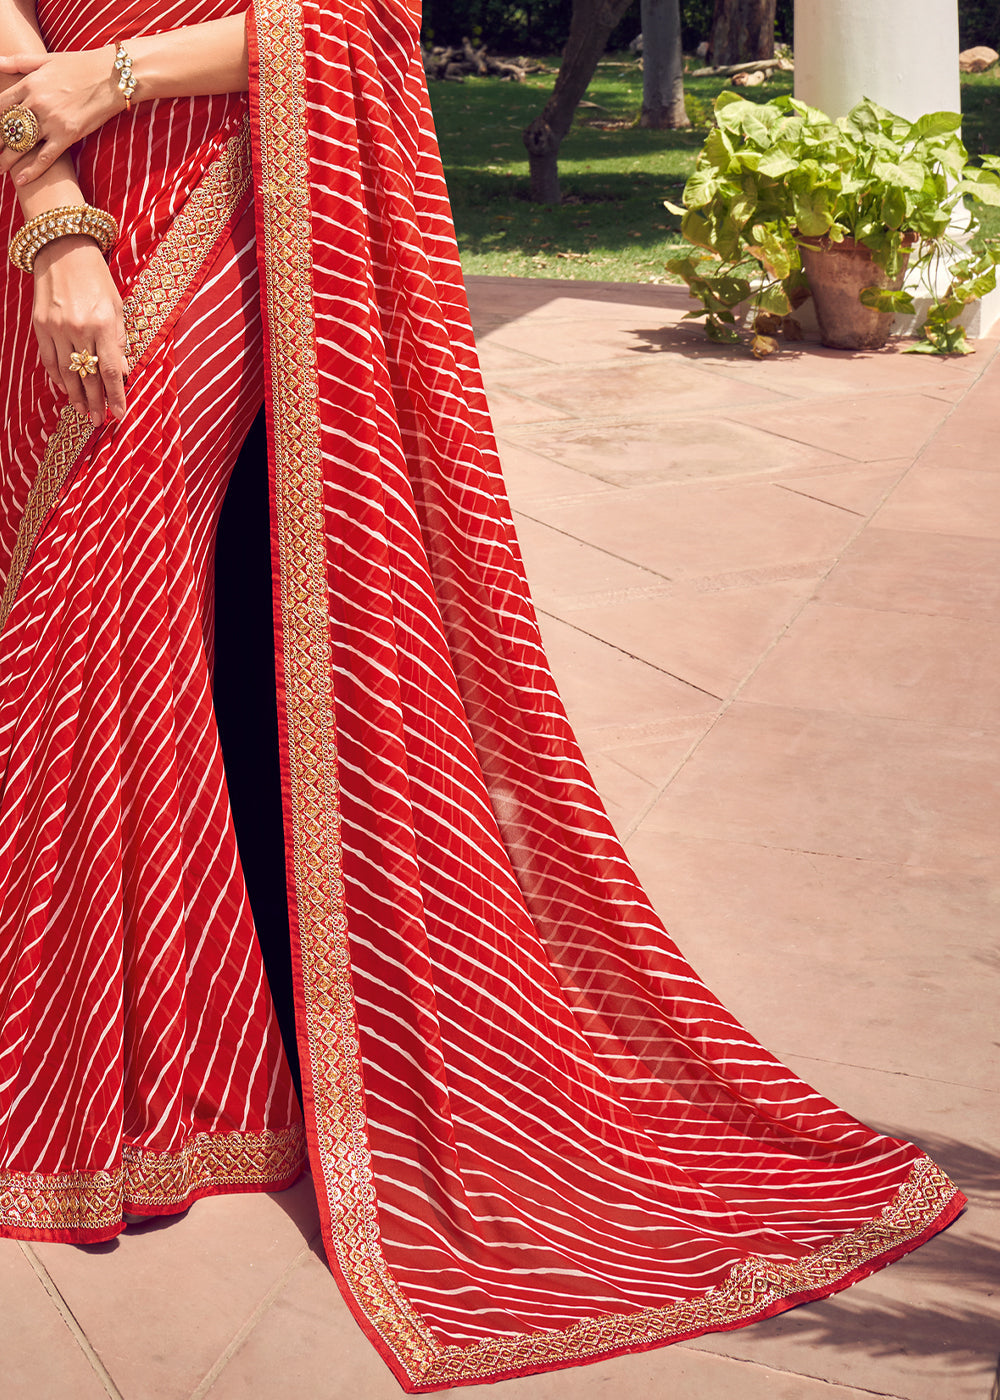 Buy MySilkLove Valencia Red Lehriya Print Georgette Saree With Embroidered Blouse Online